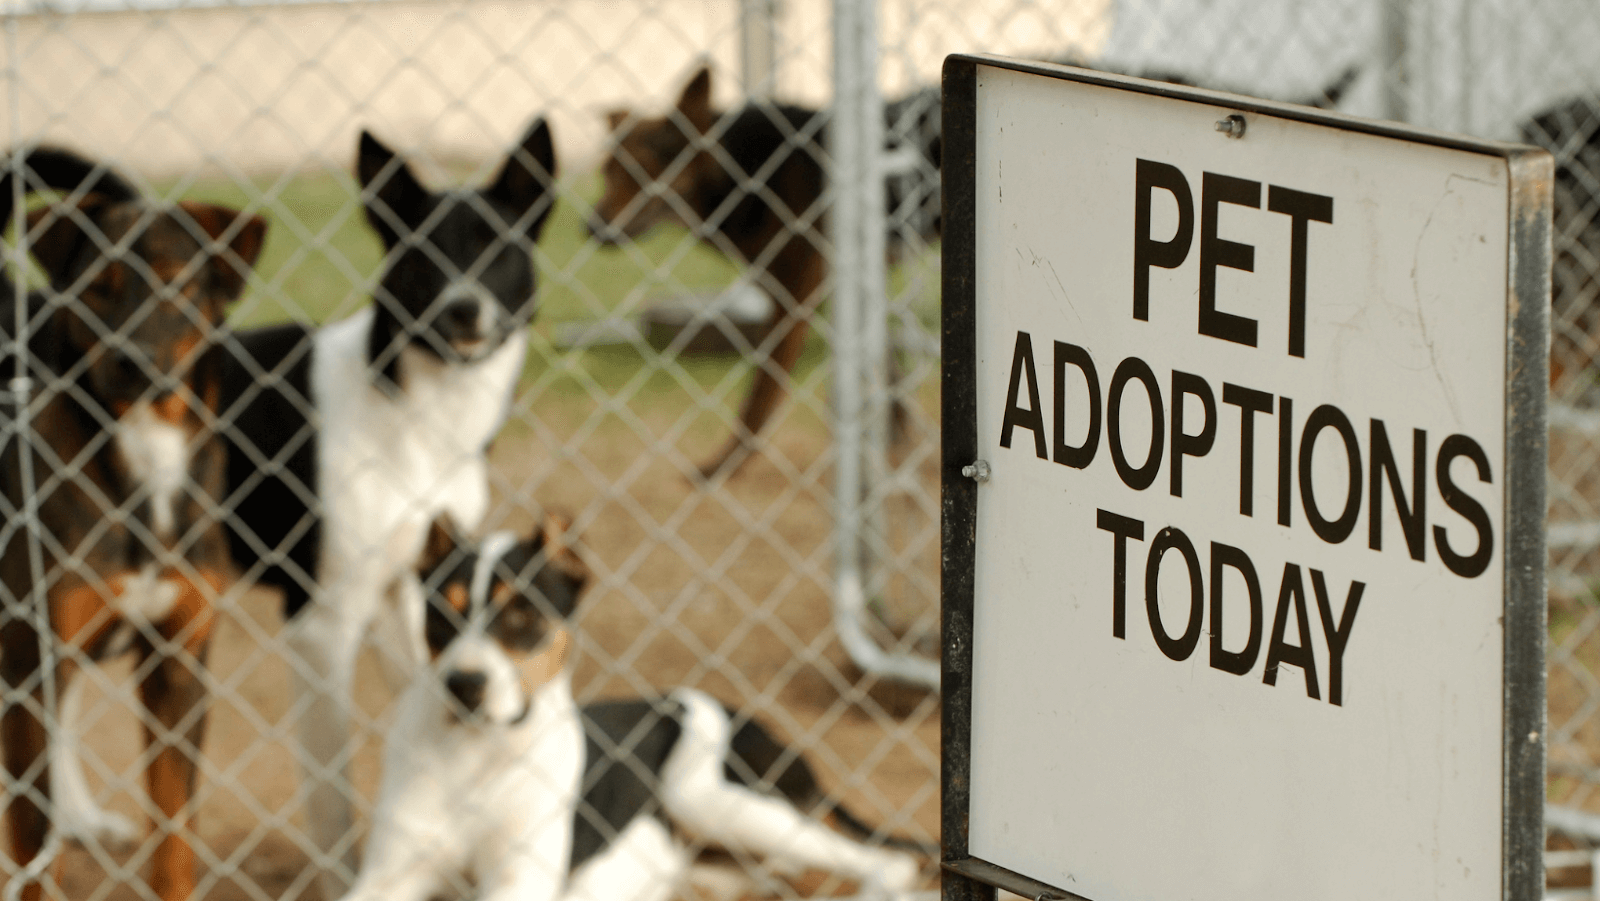 5 Things to Check Before Adopting a Dog